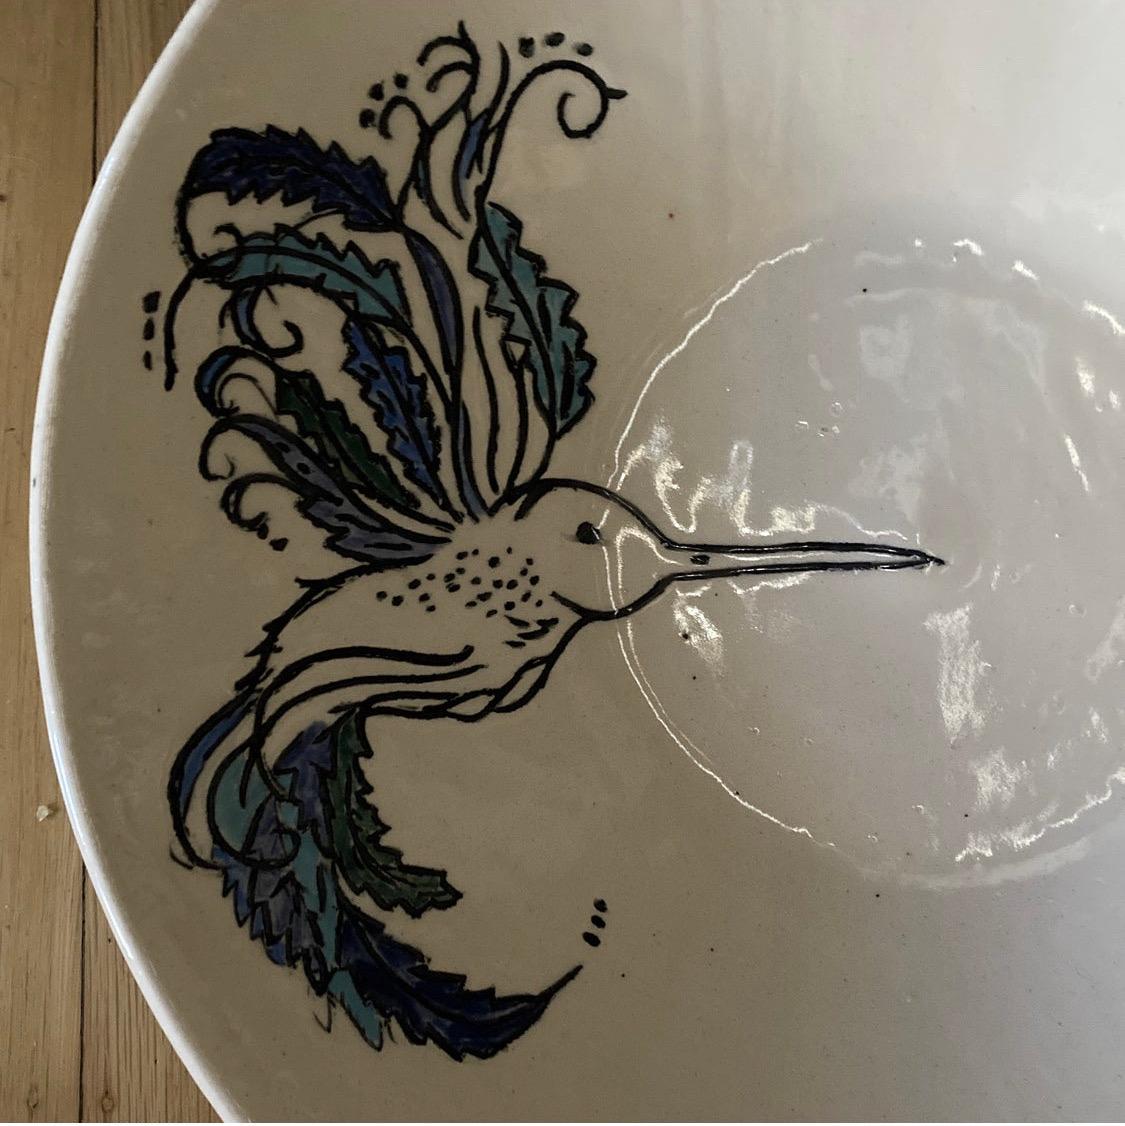 Beautiful ceramic fruit bowl with hand painted bird decoration. This folk art pottery bowl is marked, but we were unable to match it to a maker.

This bowl is in excellent condition, free of marks, cracks, crazing or chips.